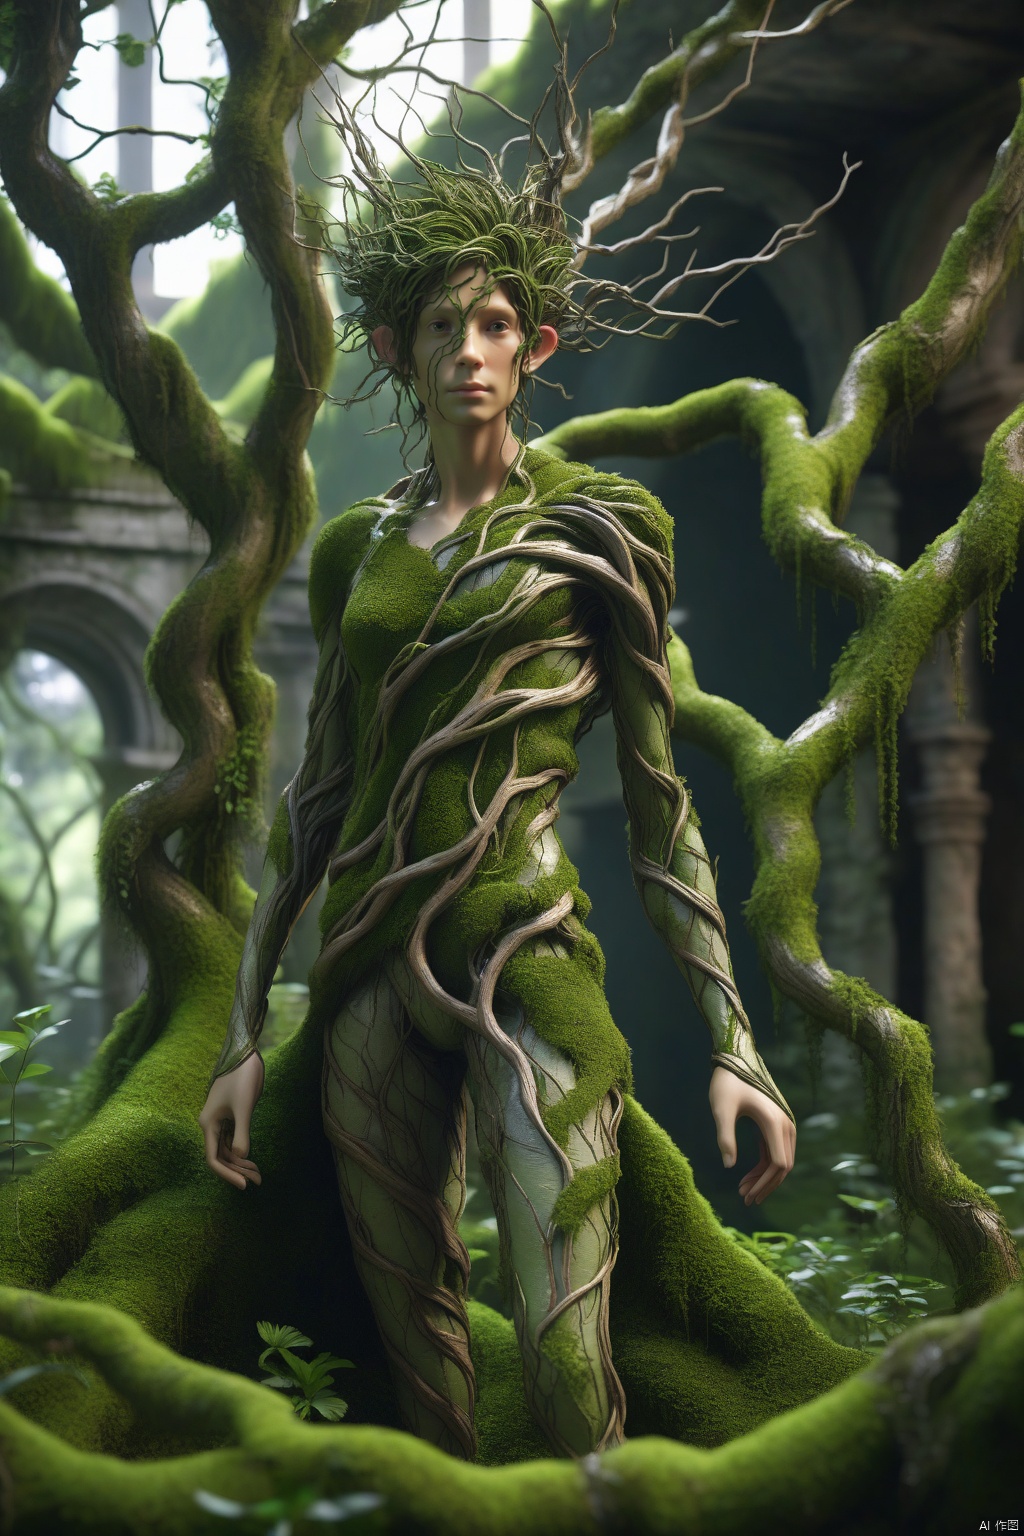  Bioengineered tree-human hybrid,looking at viewer,entwined branches for hair,bark skin,foliage sprouting from body,standing in an overgrown ruins,with moss and vines,ultra realistic,high resolution,depth of field,aesthetic,product introduction photo,